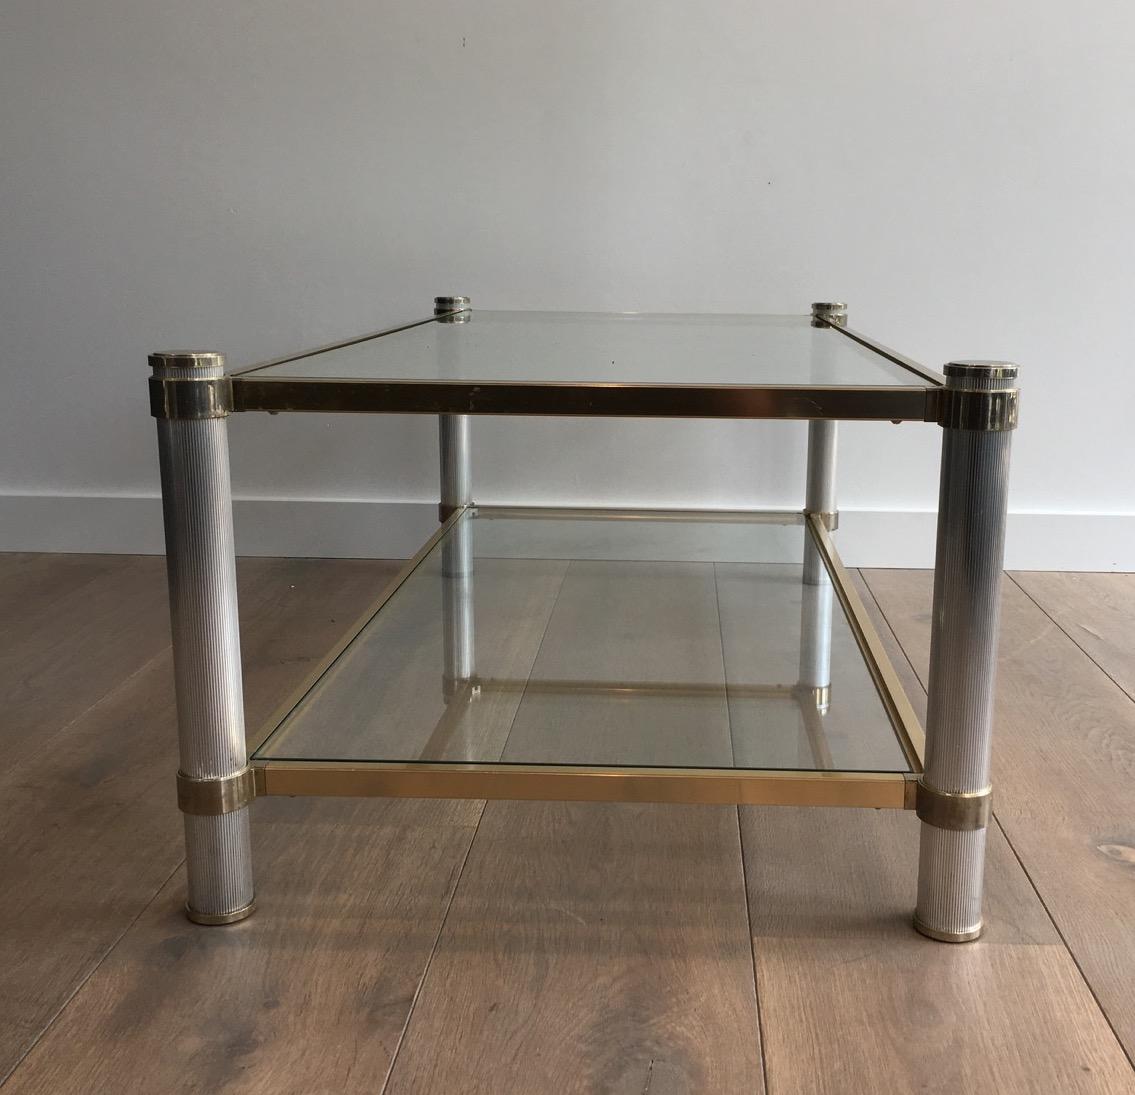  Gold Gilt and Silver Color Aluminium Coffee table with Fluted Legs by P. Vandel For Sale 8